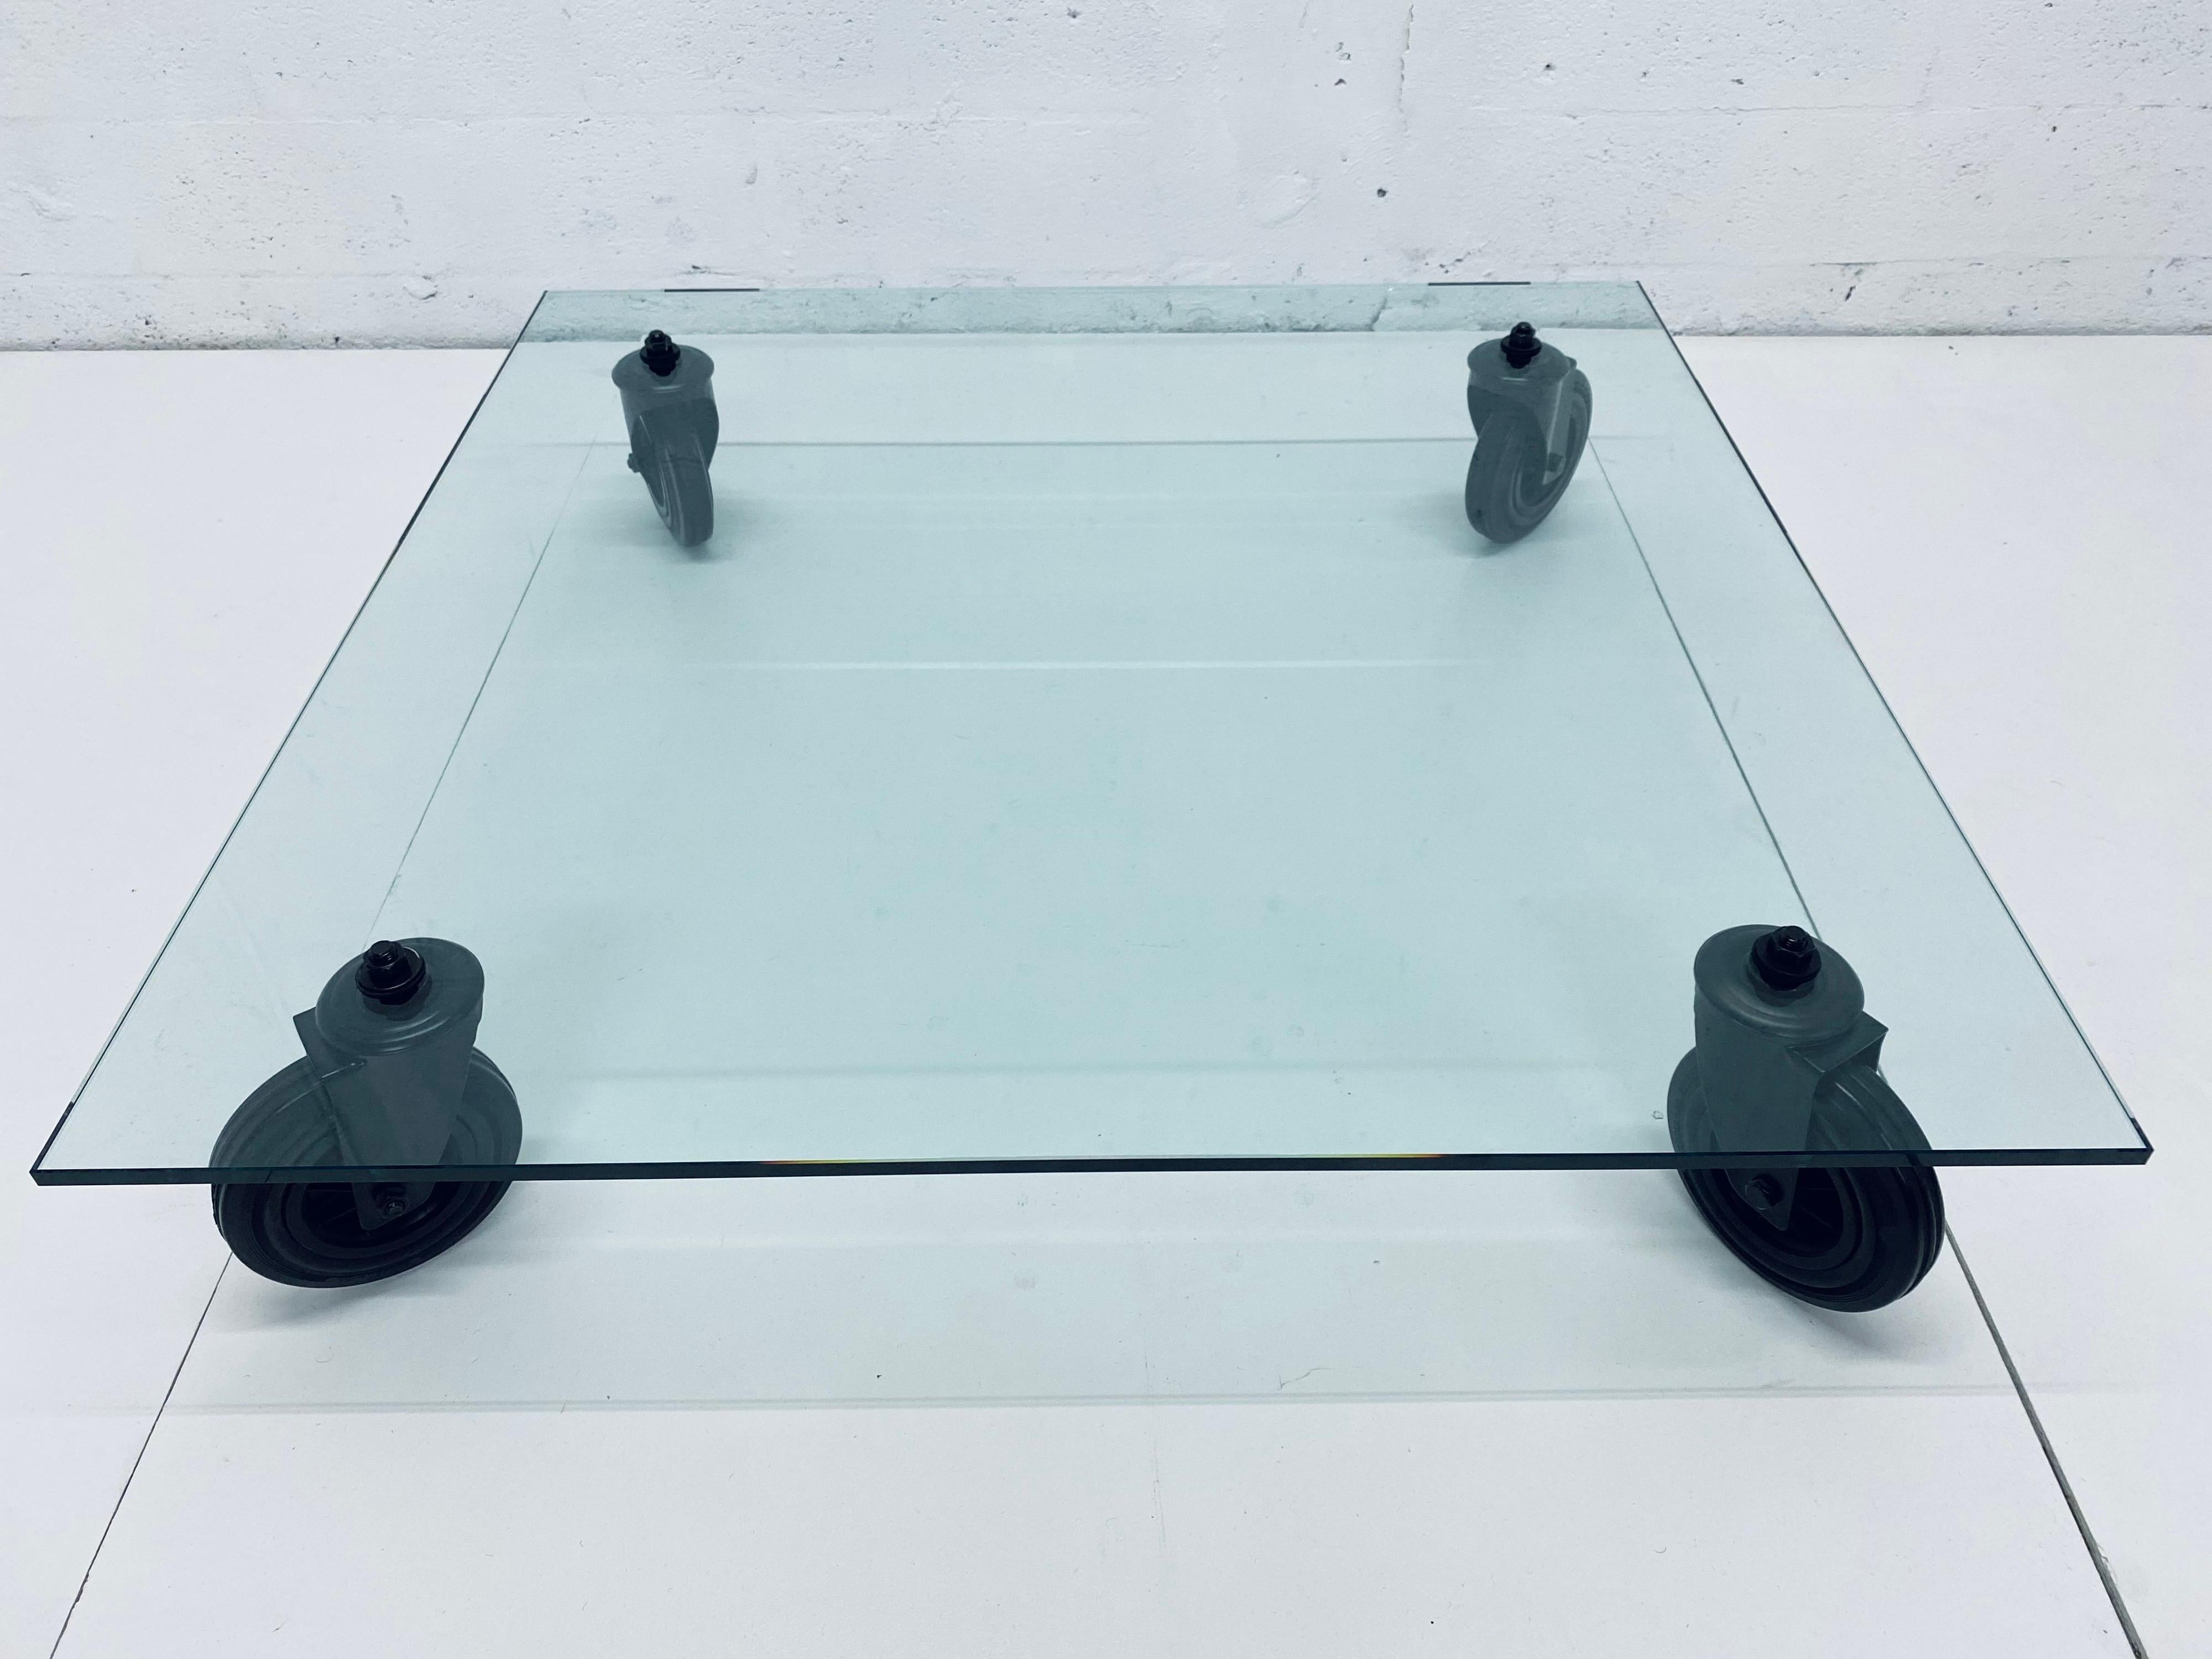 Designed by Gae Aulenti, this low coffee table consists of a tempered glass top supported by four black industrial wheels and was produced by Fontana Arte and imported by Luminaire.

An Industrial trolley used at the Fontana Arte plant to